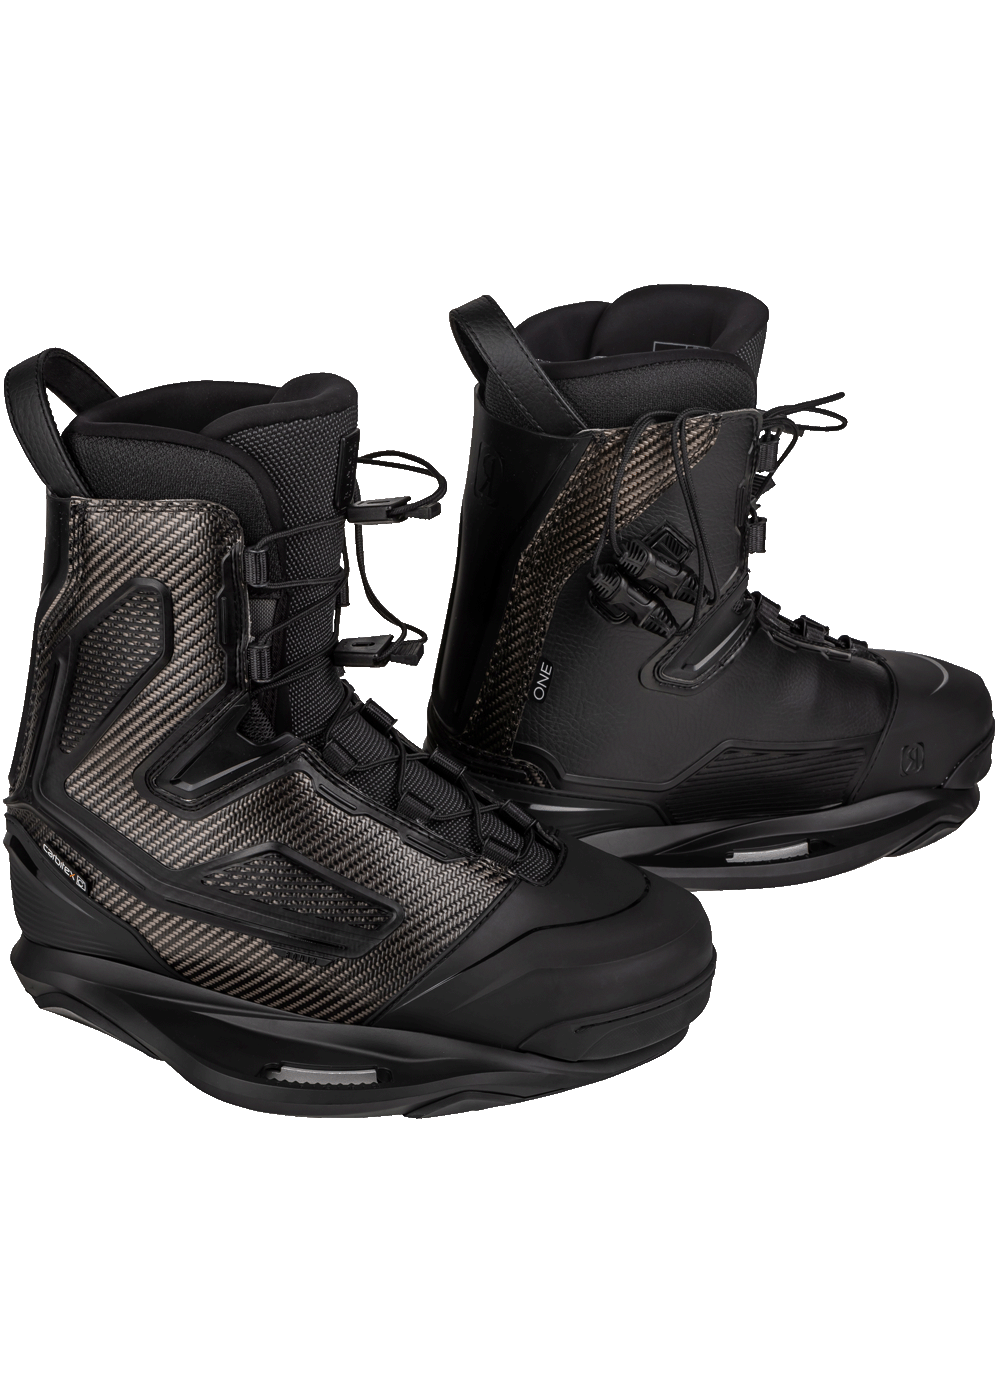 2022 Ronix One Boots - Carbitx - Intuition+